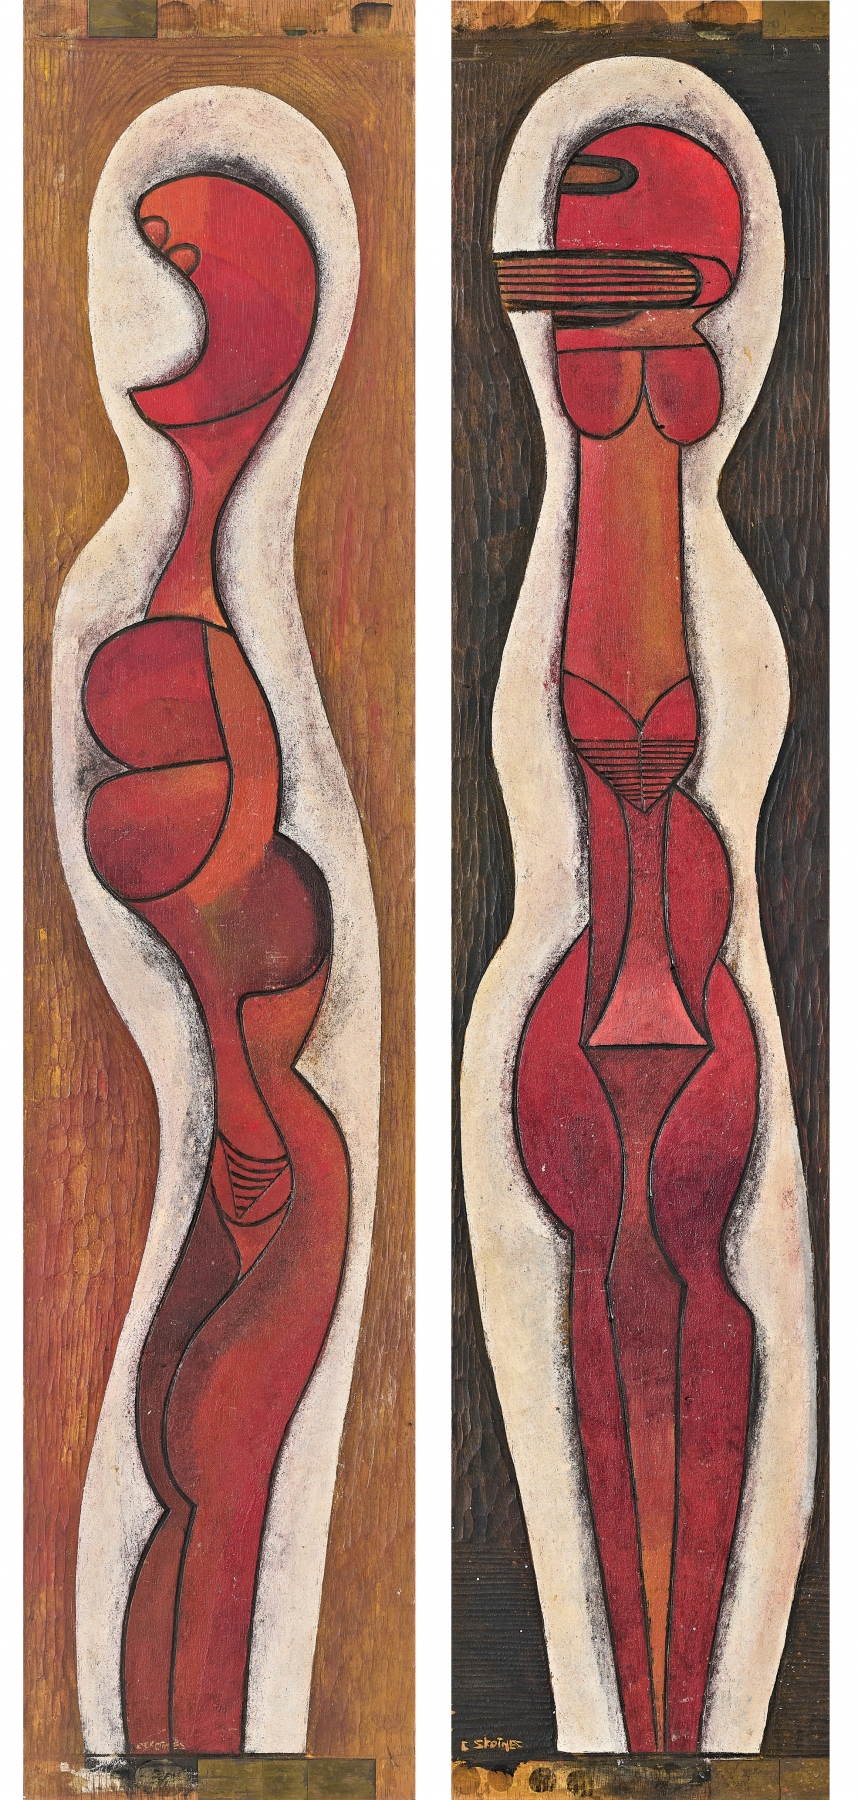 Cecil Skotnes

Totems - diptych, c.&amp;nbsp;1987

Pigments on incised wood panels; diptych

100 x 22 x 3.3 cm (39.4 x 8.7 x 1.2 in)

Enquire